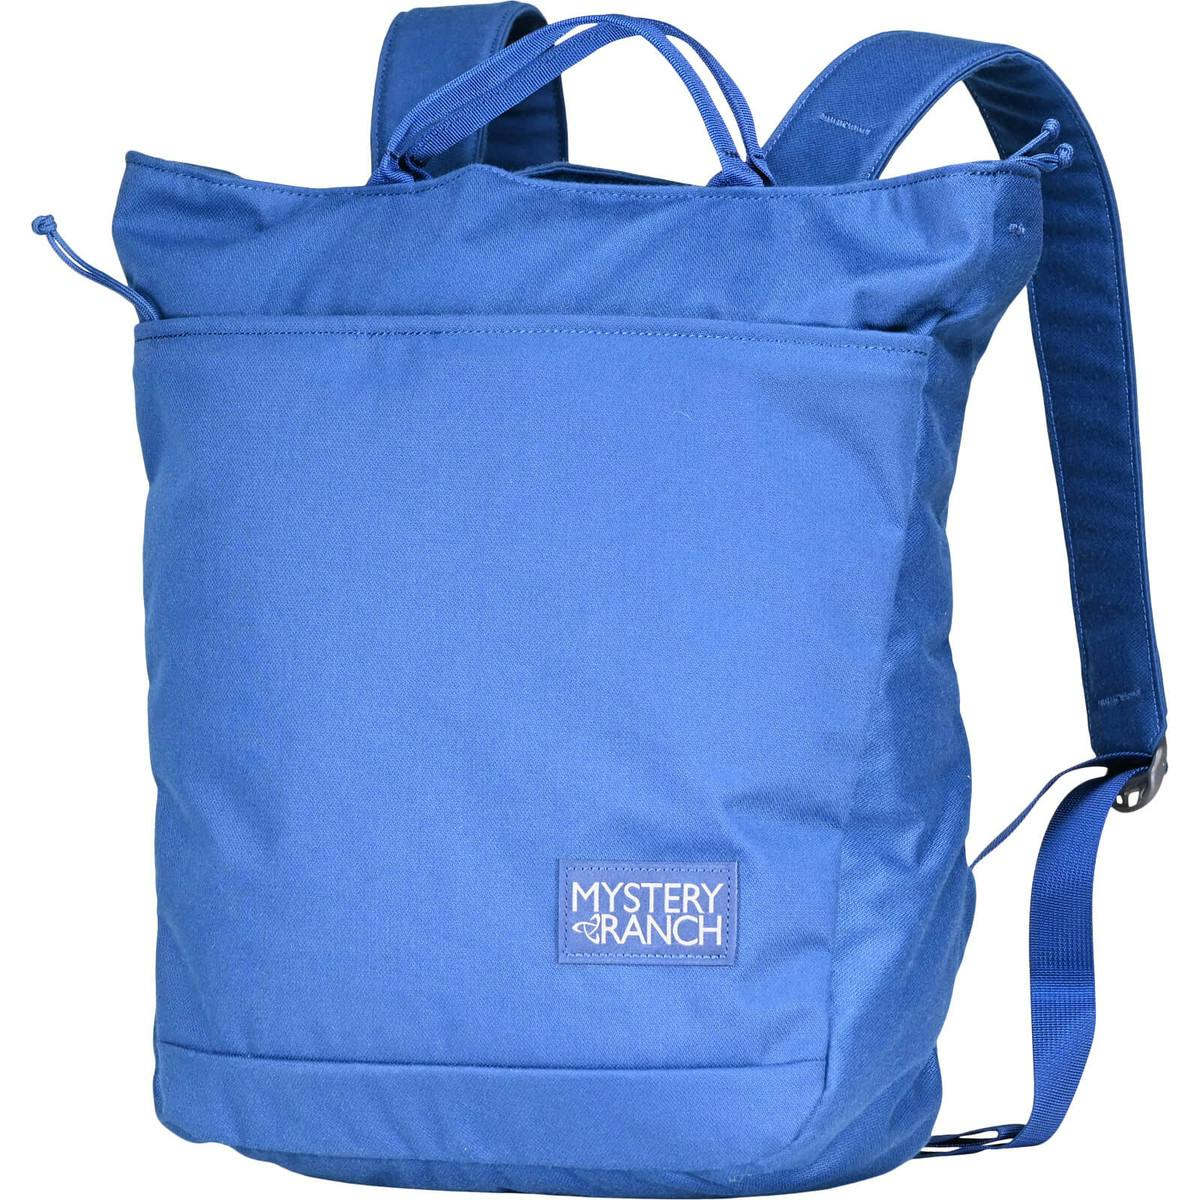 Mystery Ranch Super Market 22 Backpack